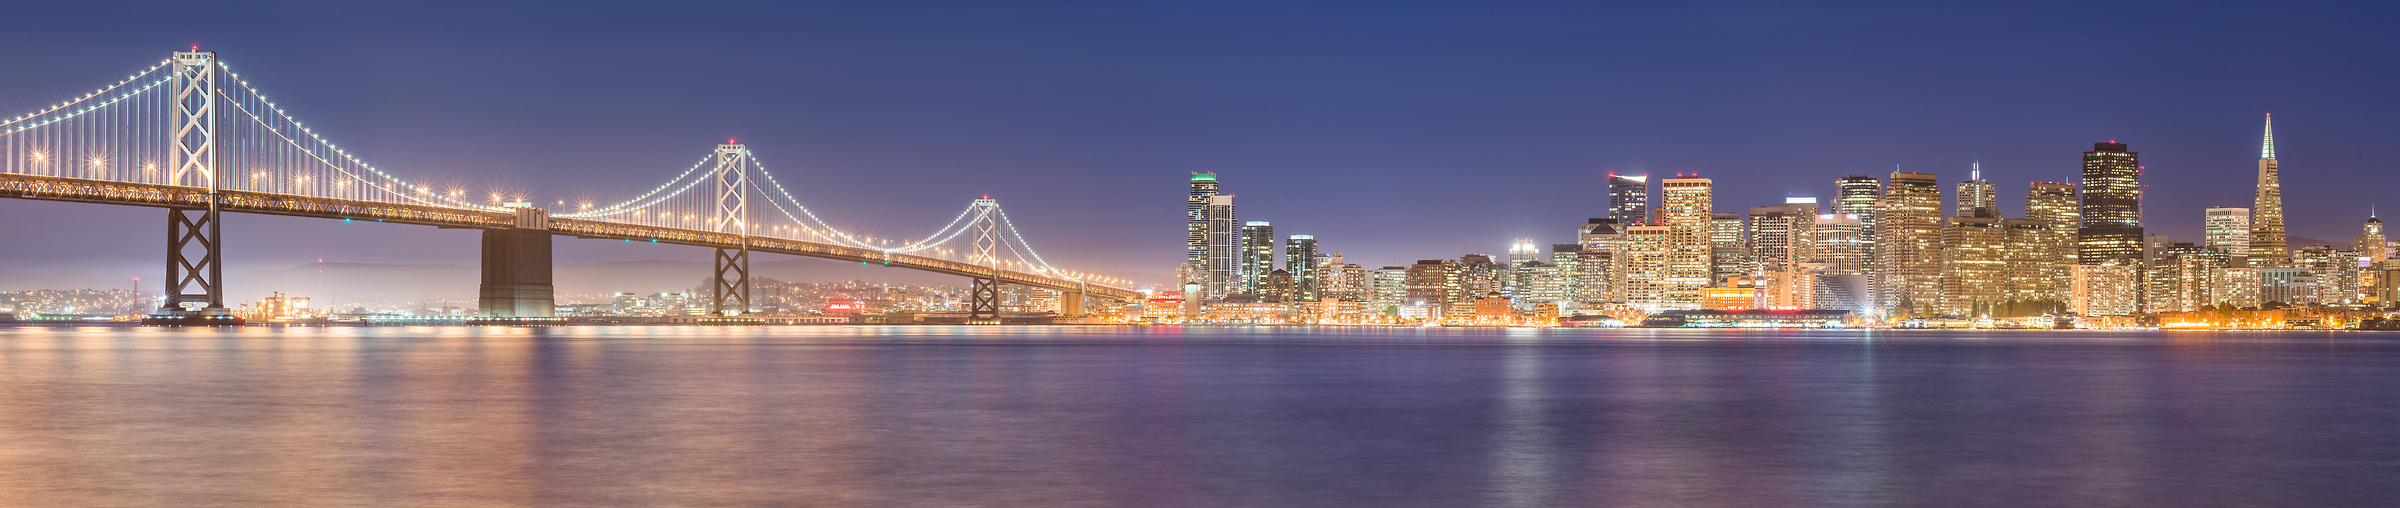 112 megapixels! A very high resolution, large-format VAST photo print of the San Francisco skyline in California at at night; cityscape photo created by Justin Katz